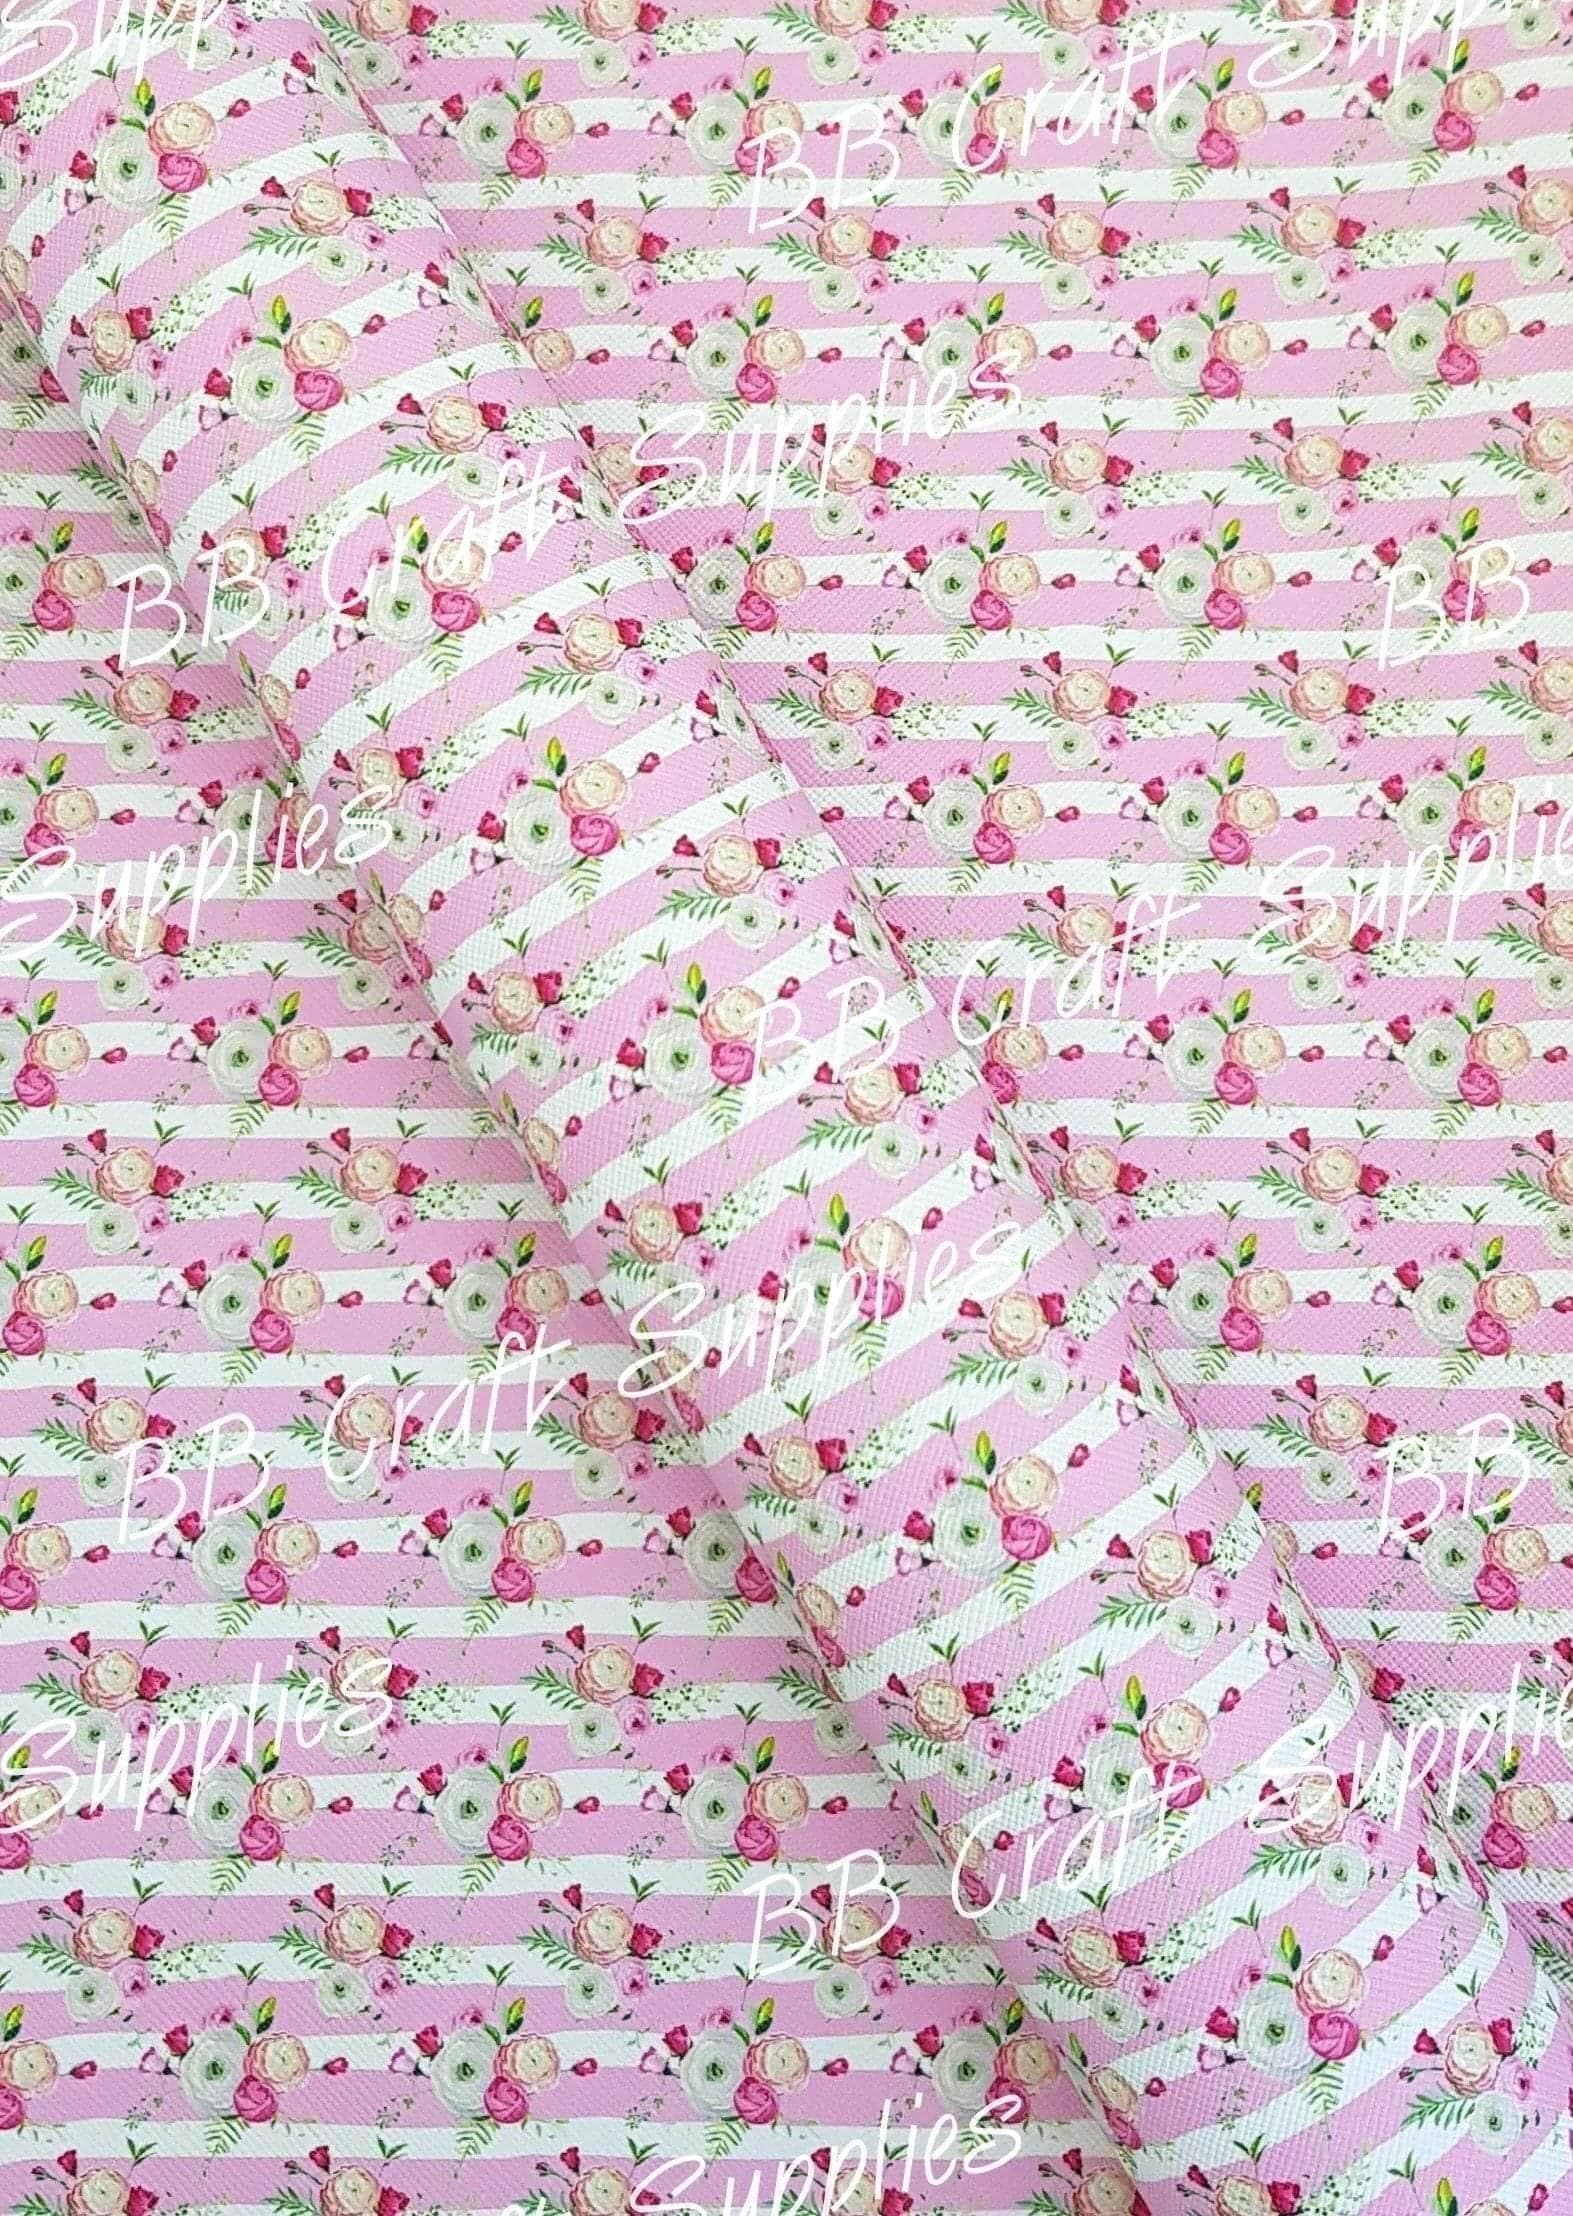 Pink & White Stripe Florals Faux Leather - Faux, Faux Leather, florals, Leather, leatherette, Pink, stripe, White - Bare Butler Faux Leather Supplies 